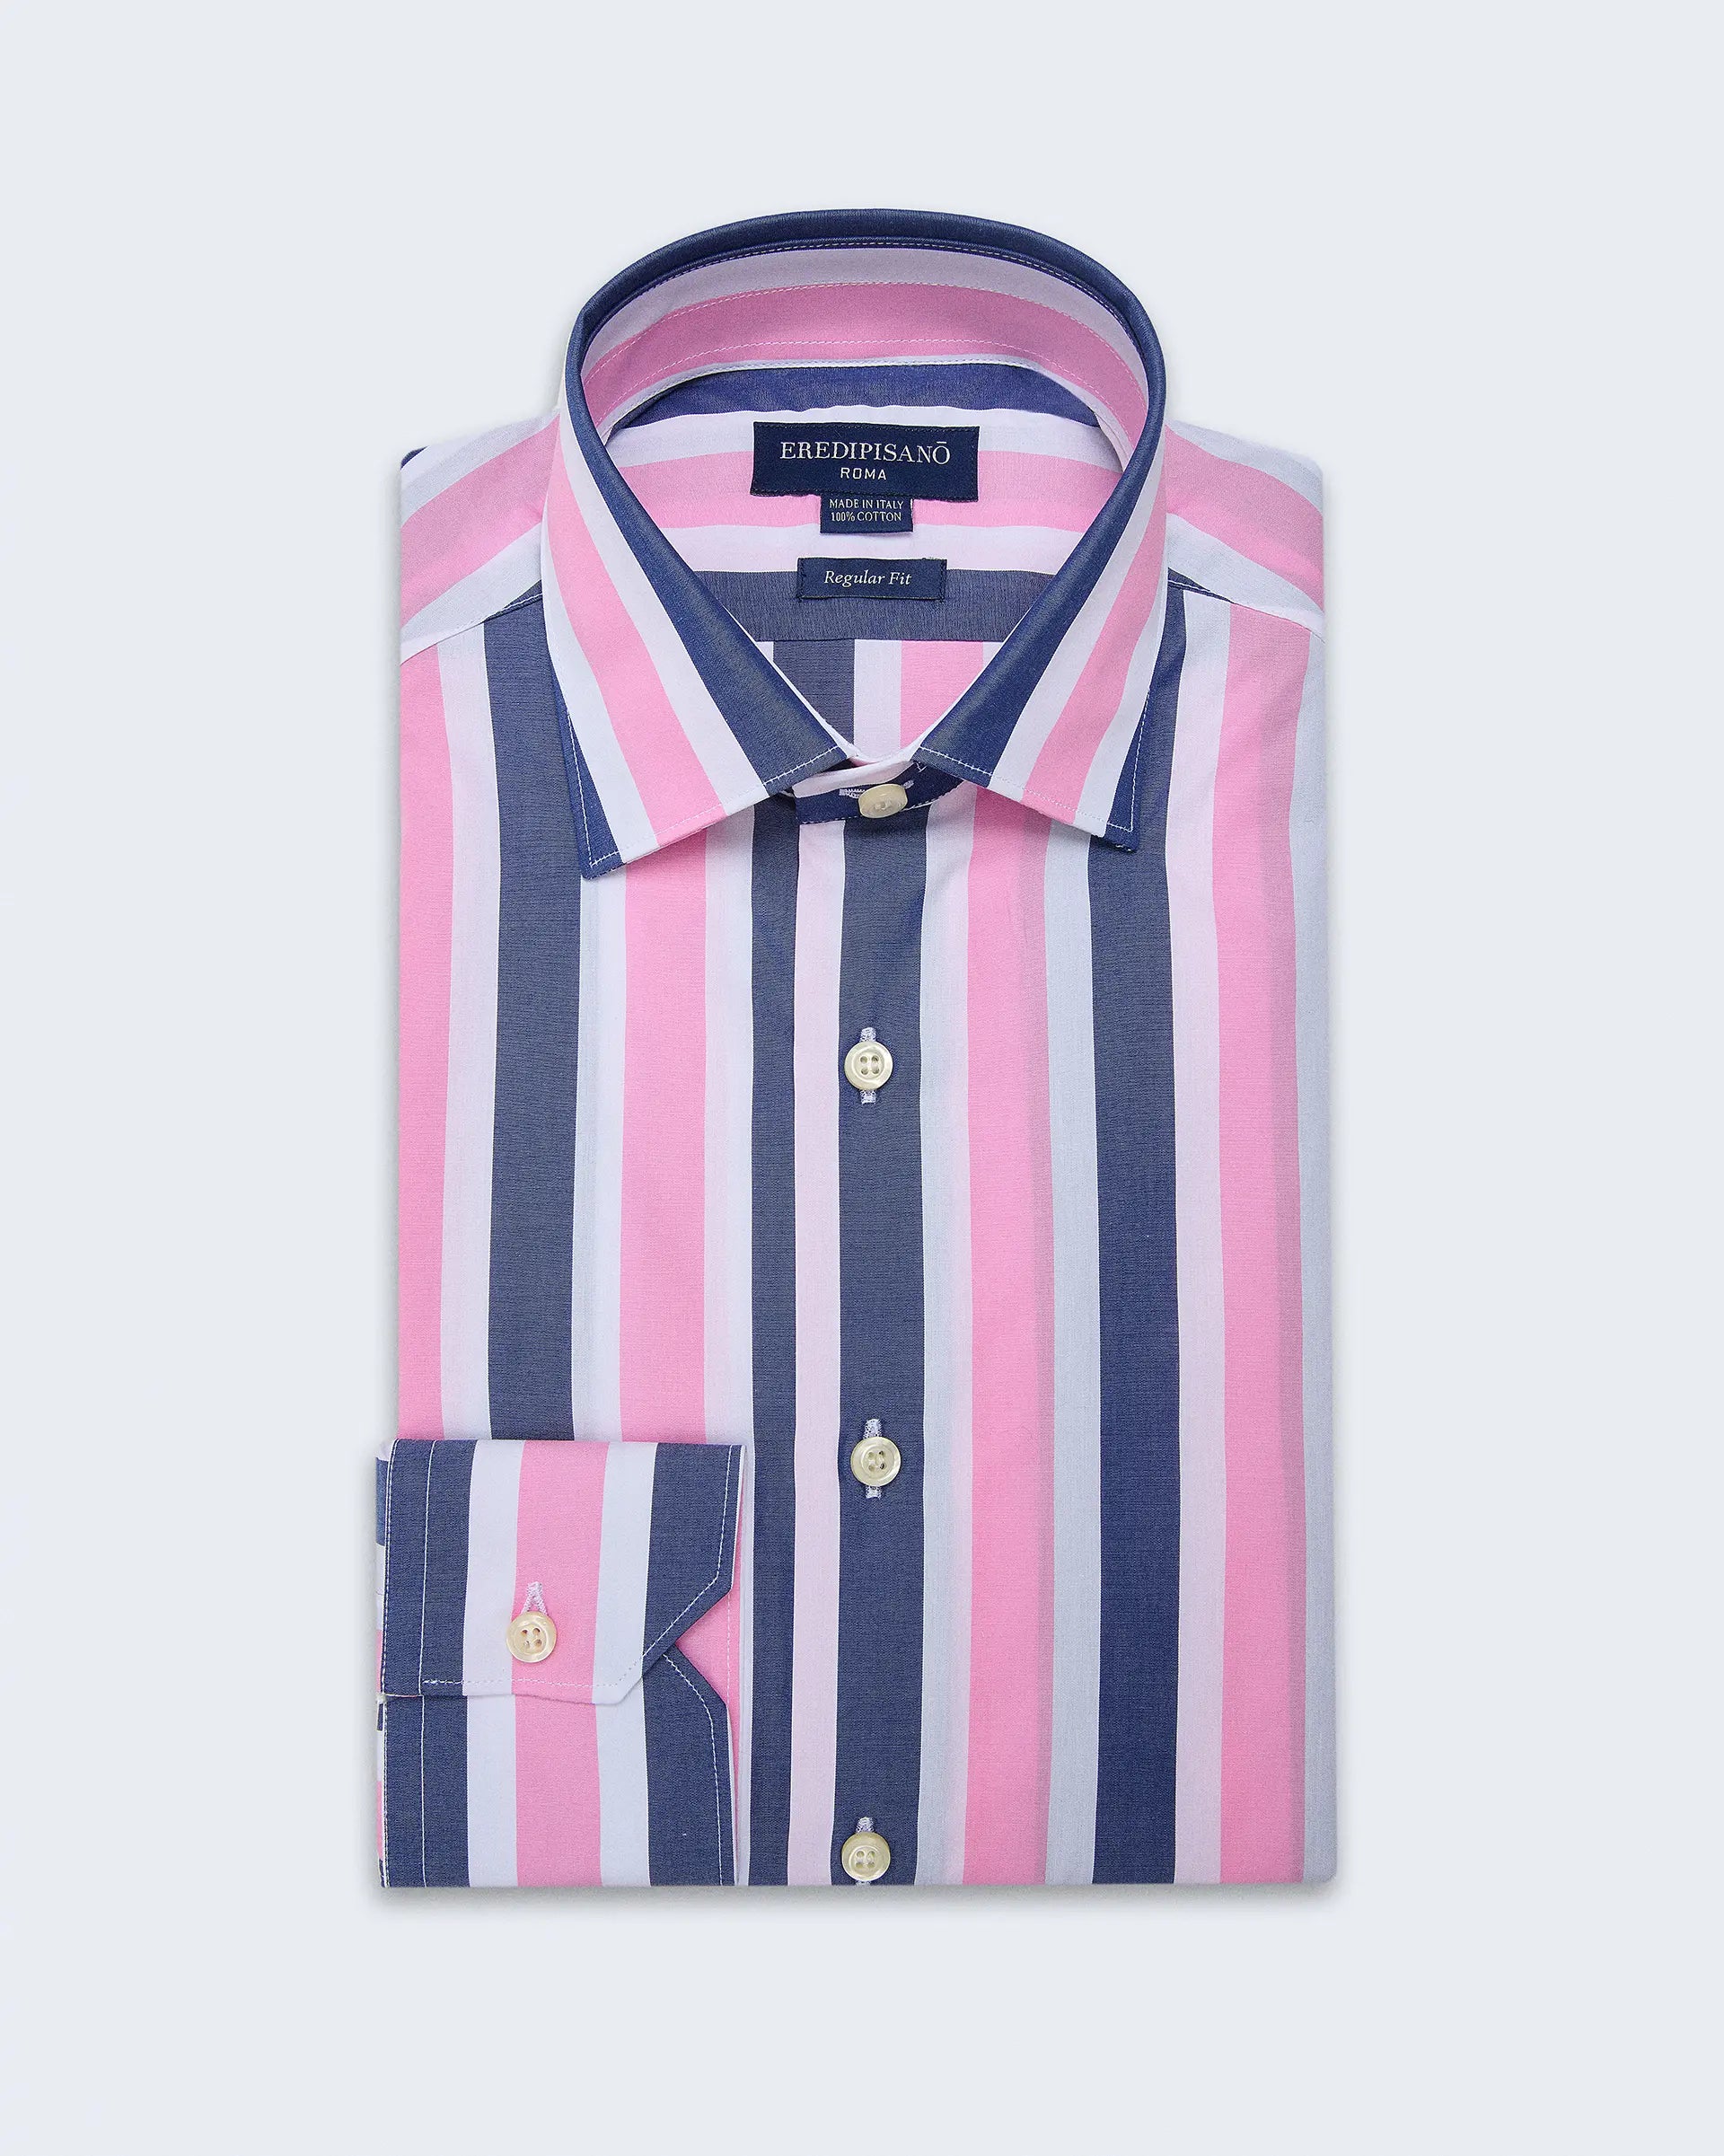 Regular fit blue and pink striped shirt with Milan collar